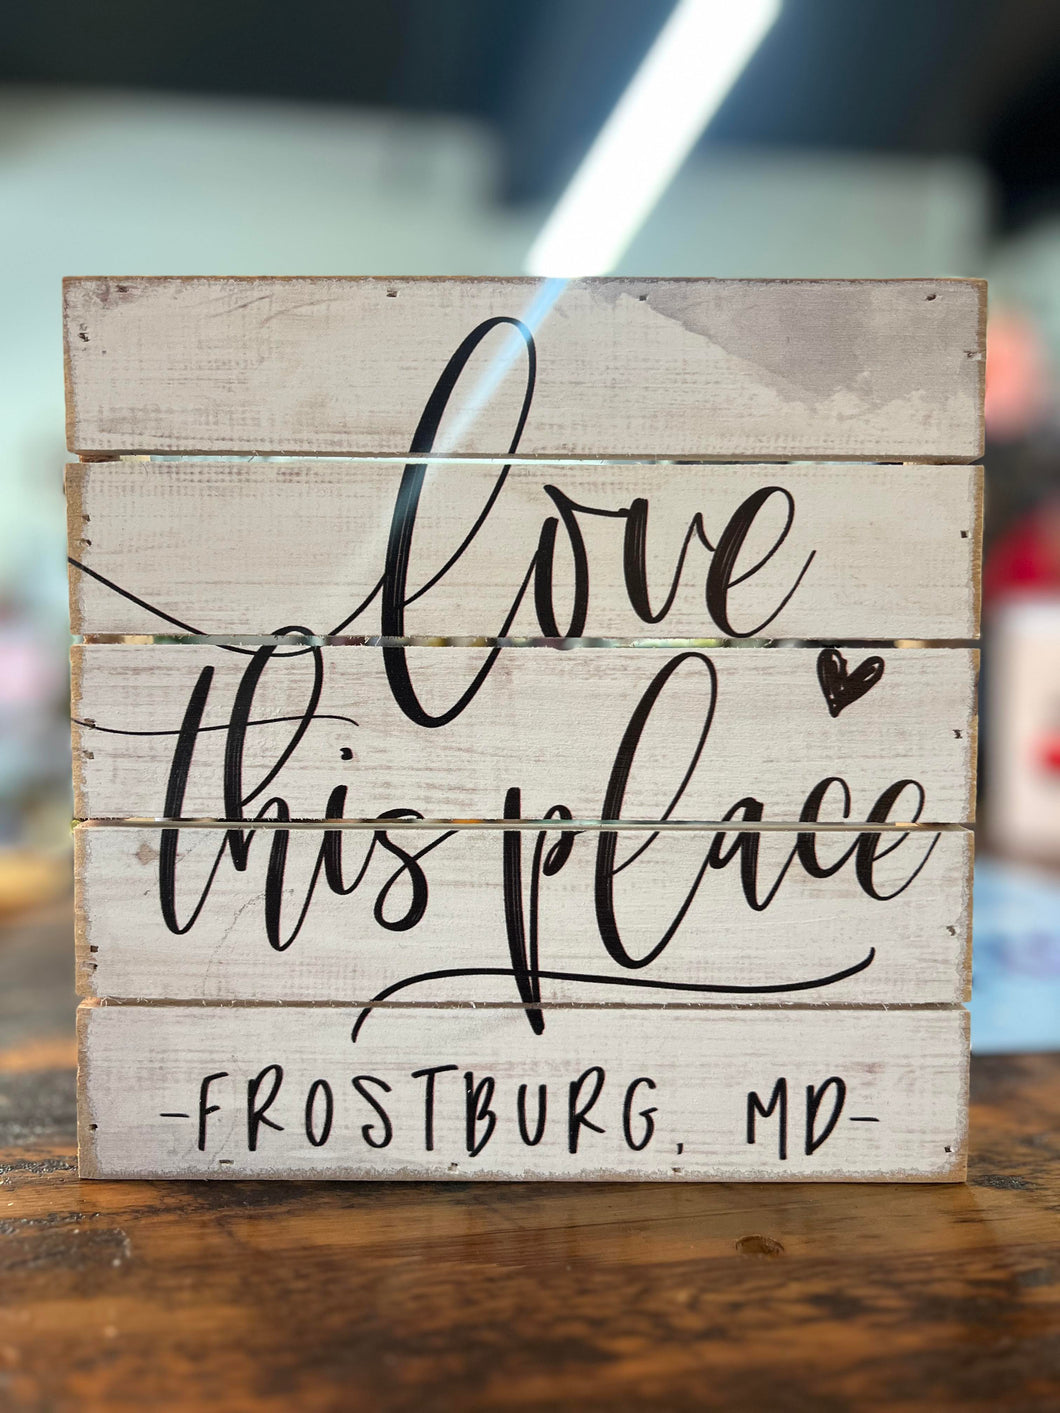 Love This Place Frostburg, MD Sign